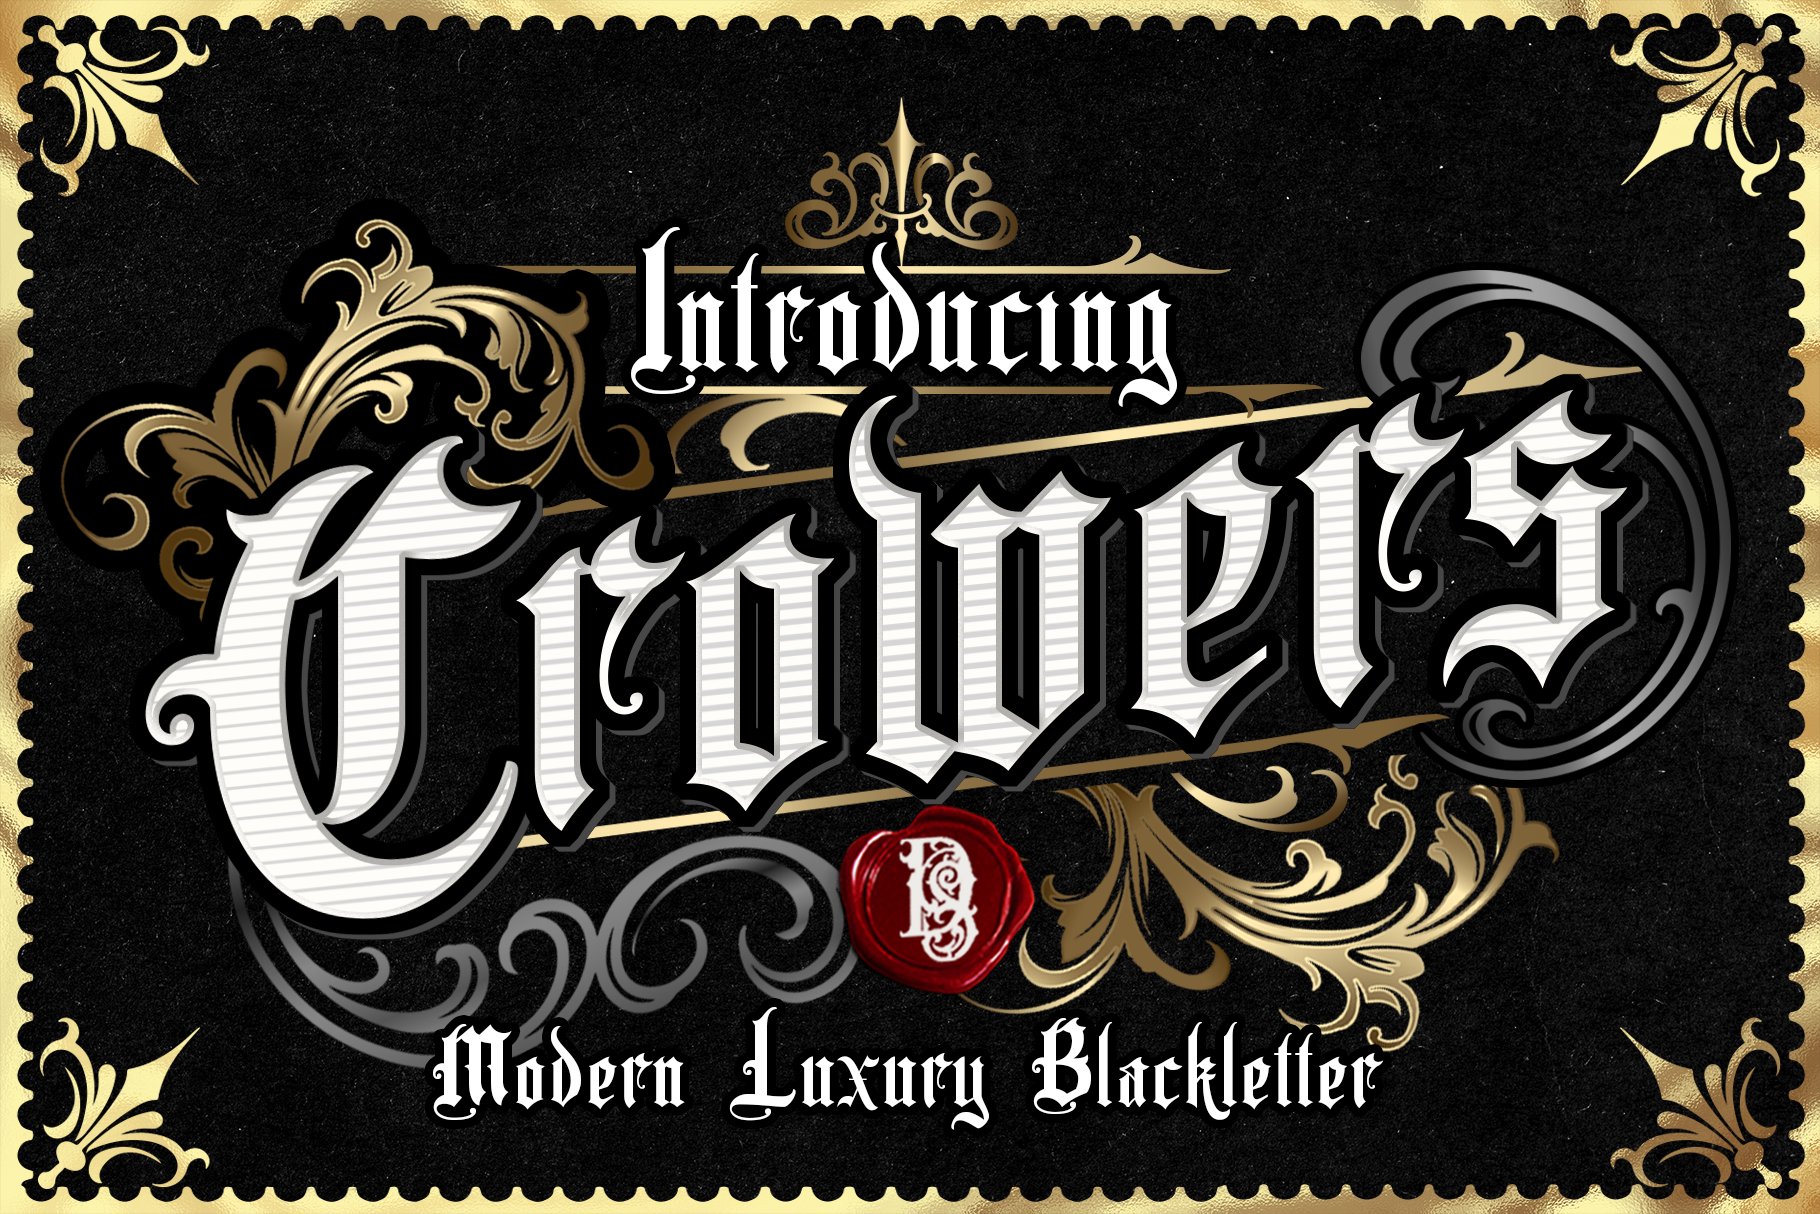 Crowers  luxury Blackletter cover image.